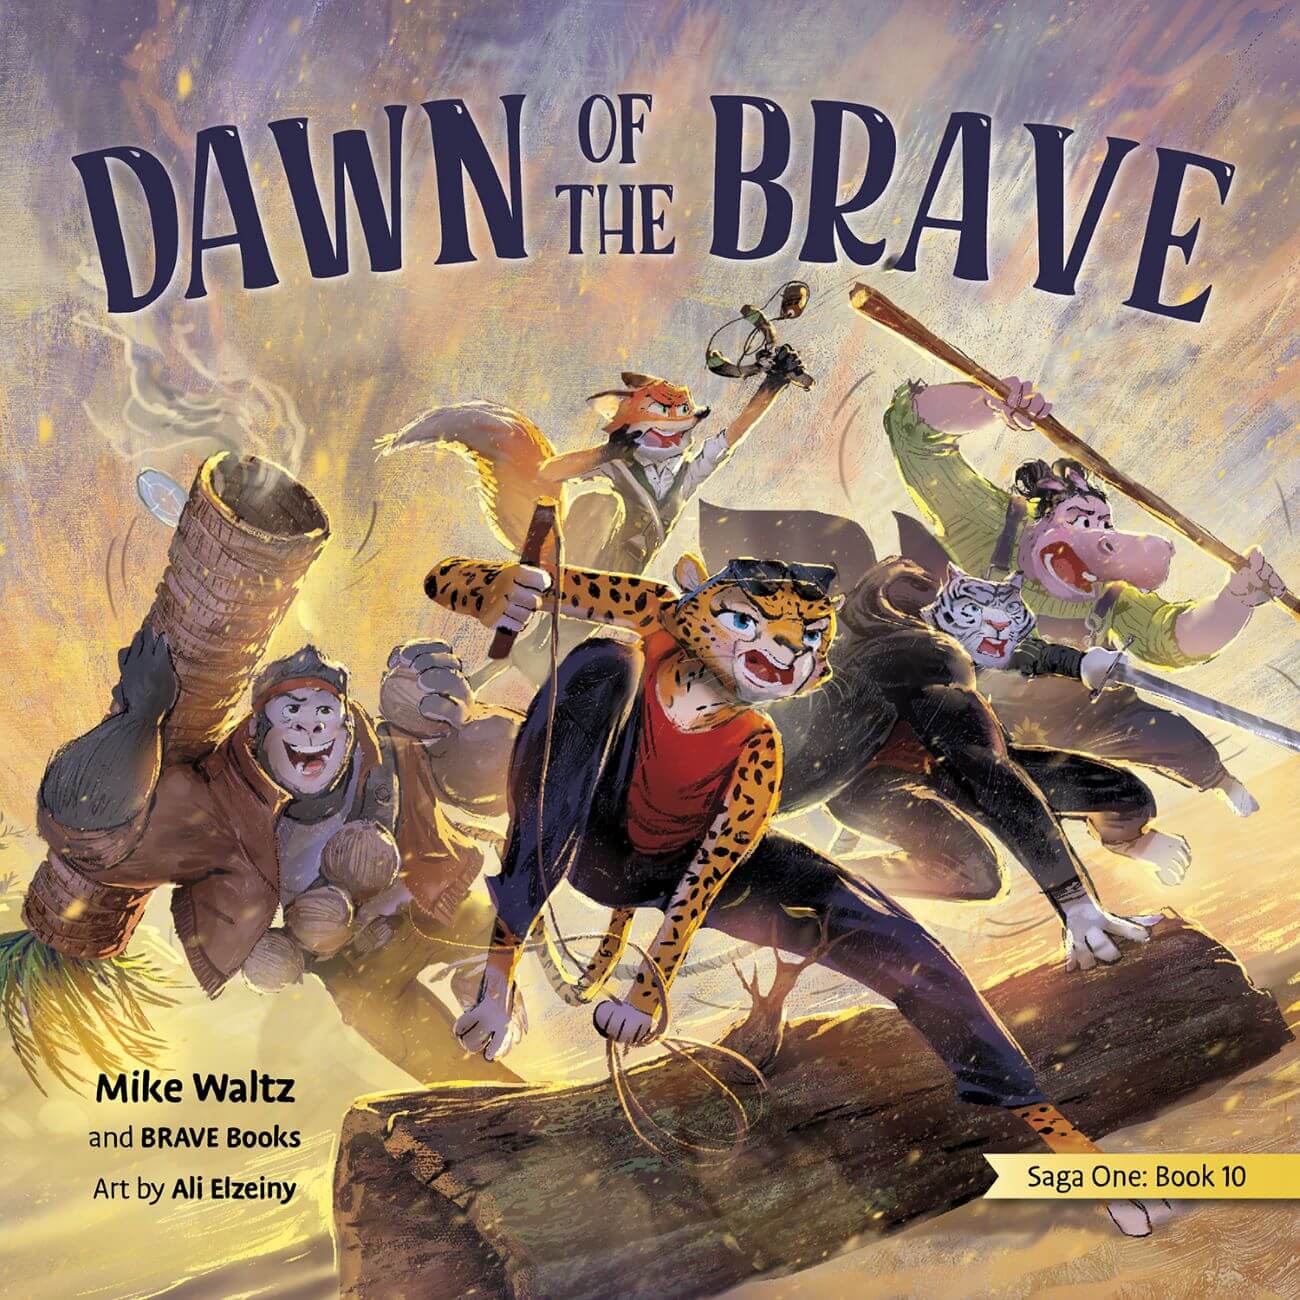 Dawn of the BRAVE